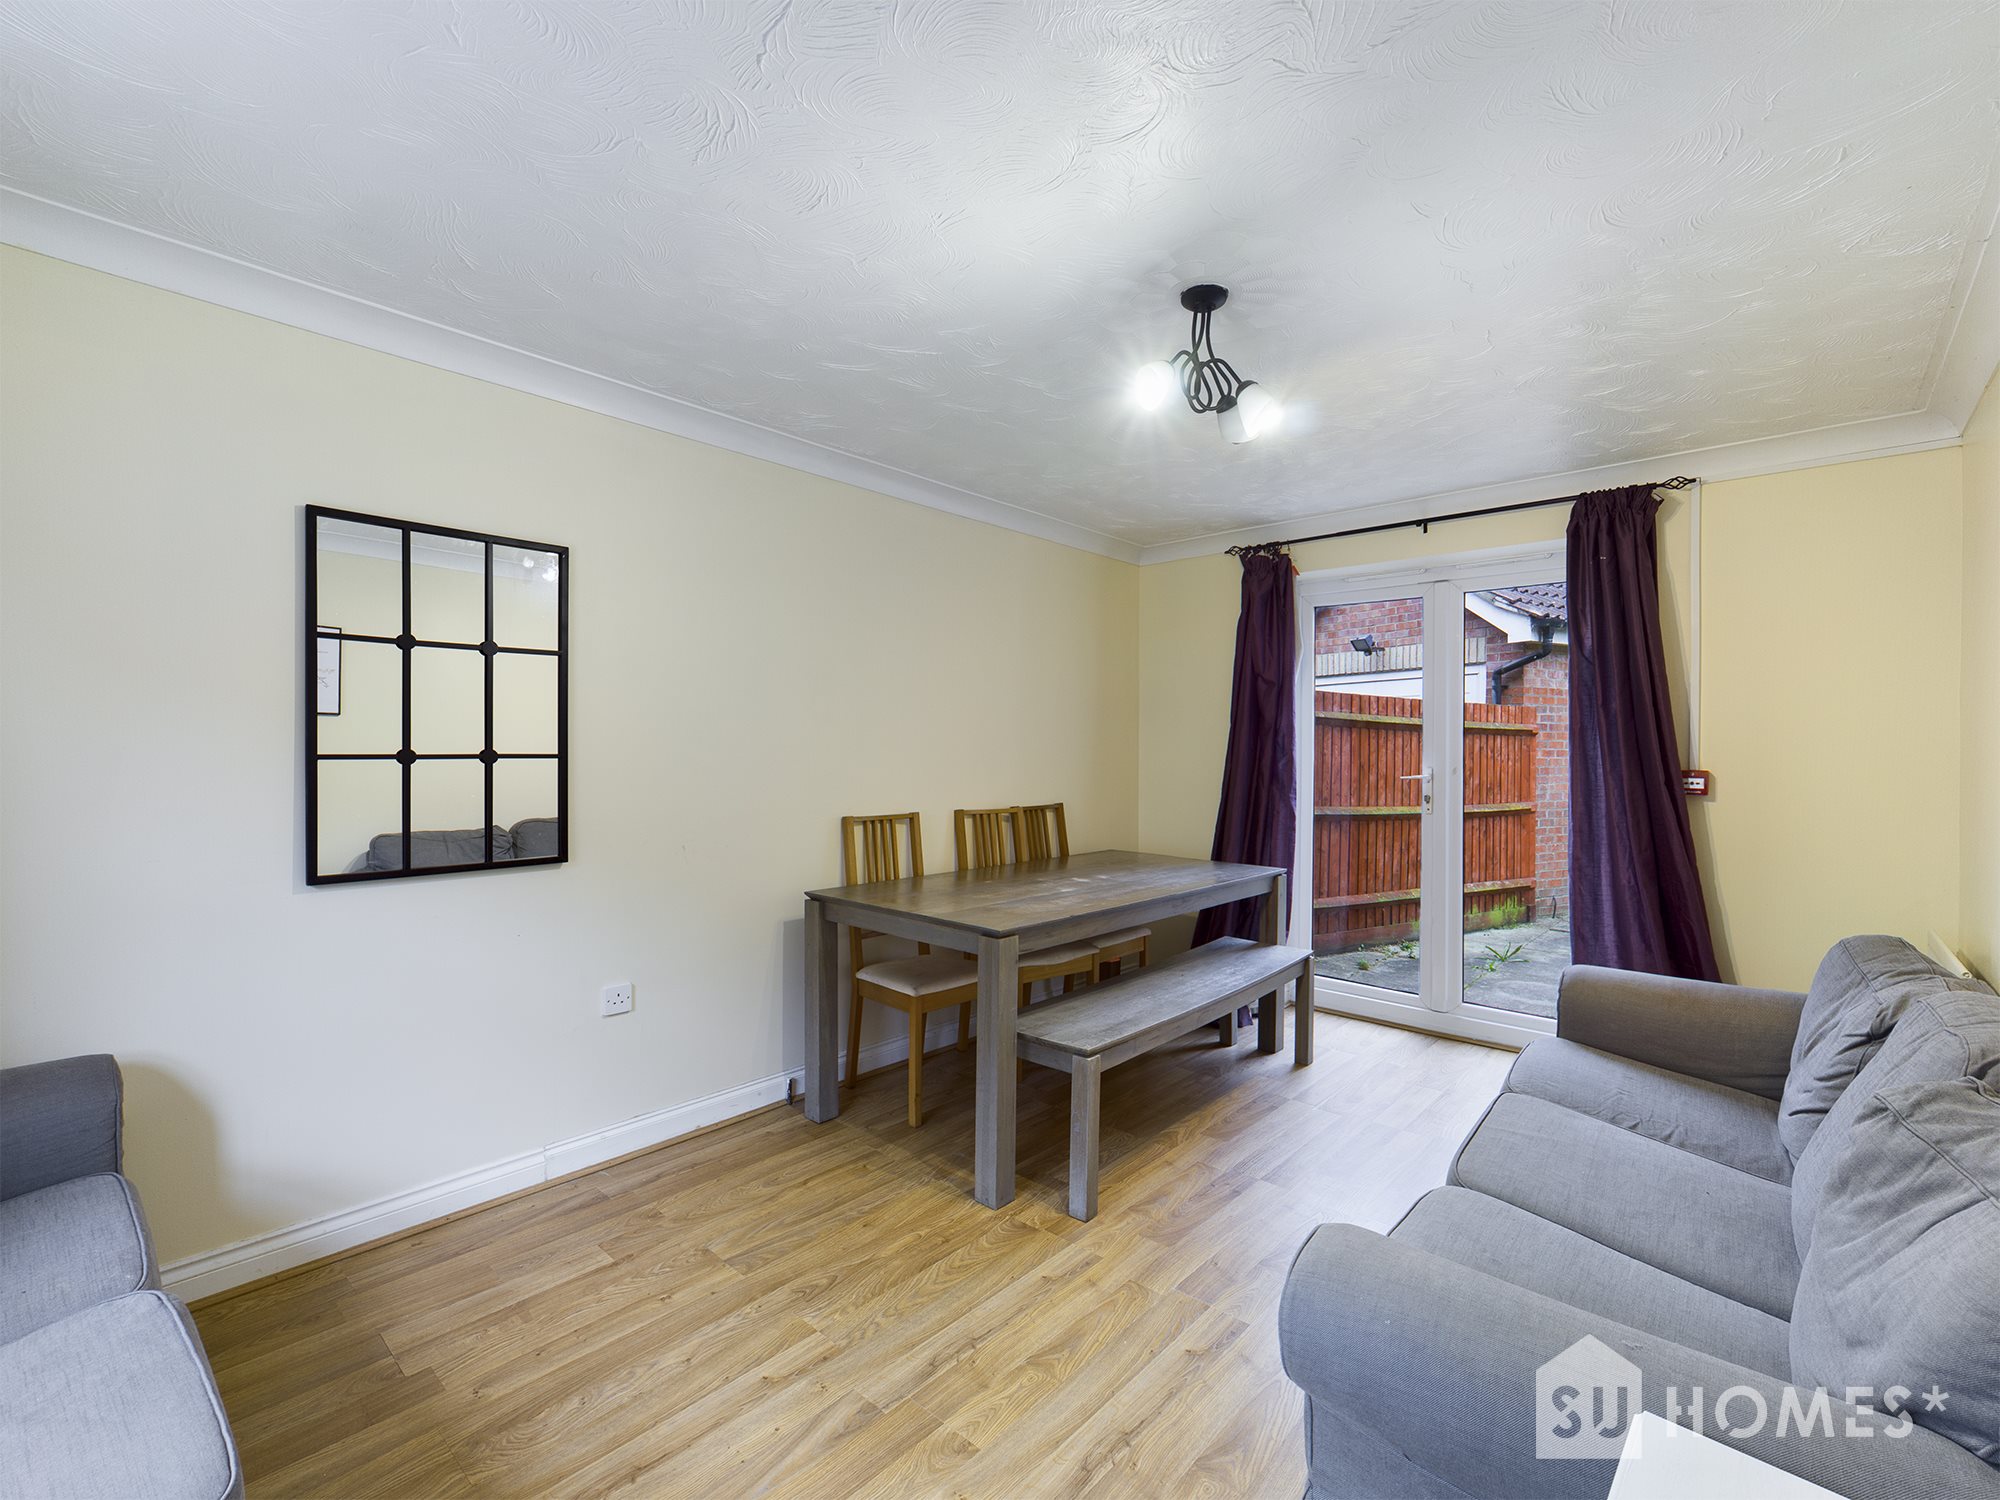 6 bed house to rent in Hesper Road, Colchester - Property Image 1